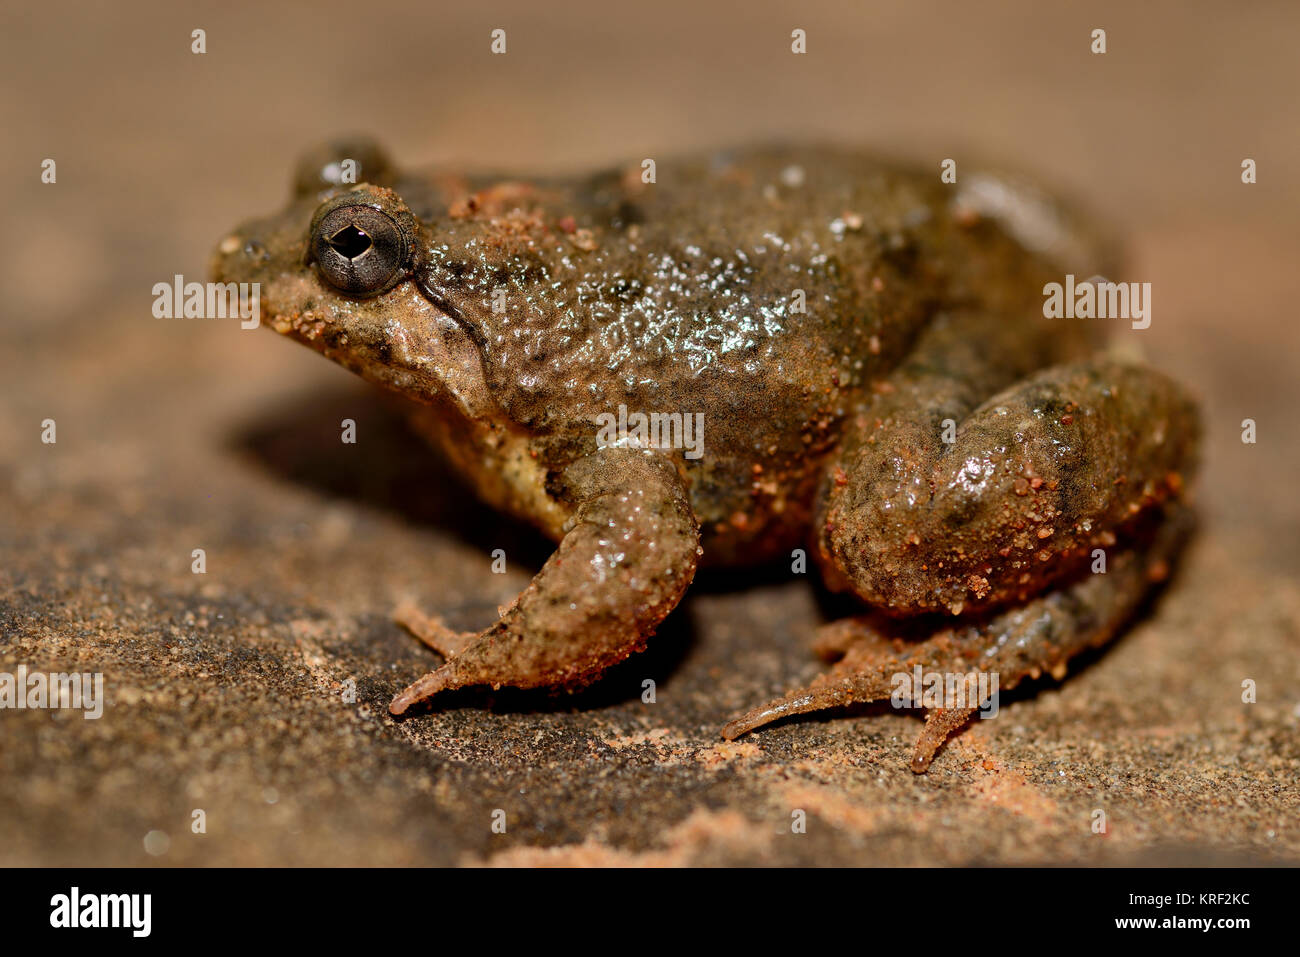 Floating frog (Occidozyga martensii) in the edge of a pond in Angkor Thom, Siem Reap, Cambodia Stock Photo